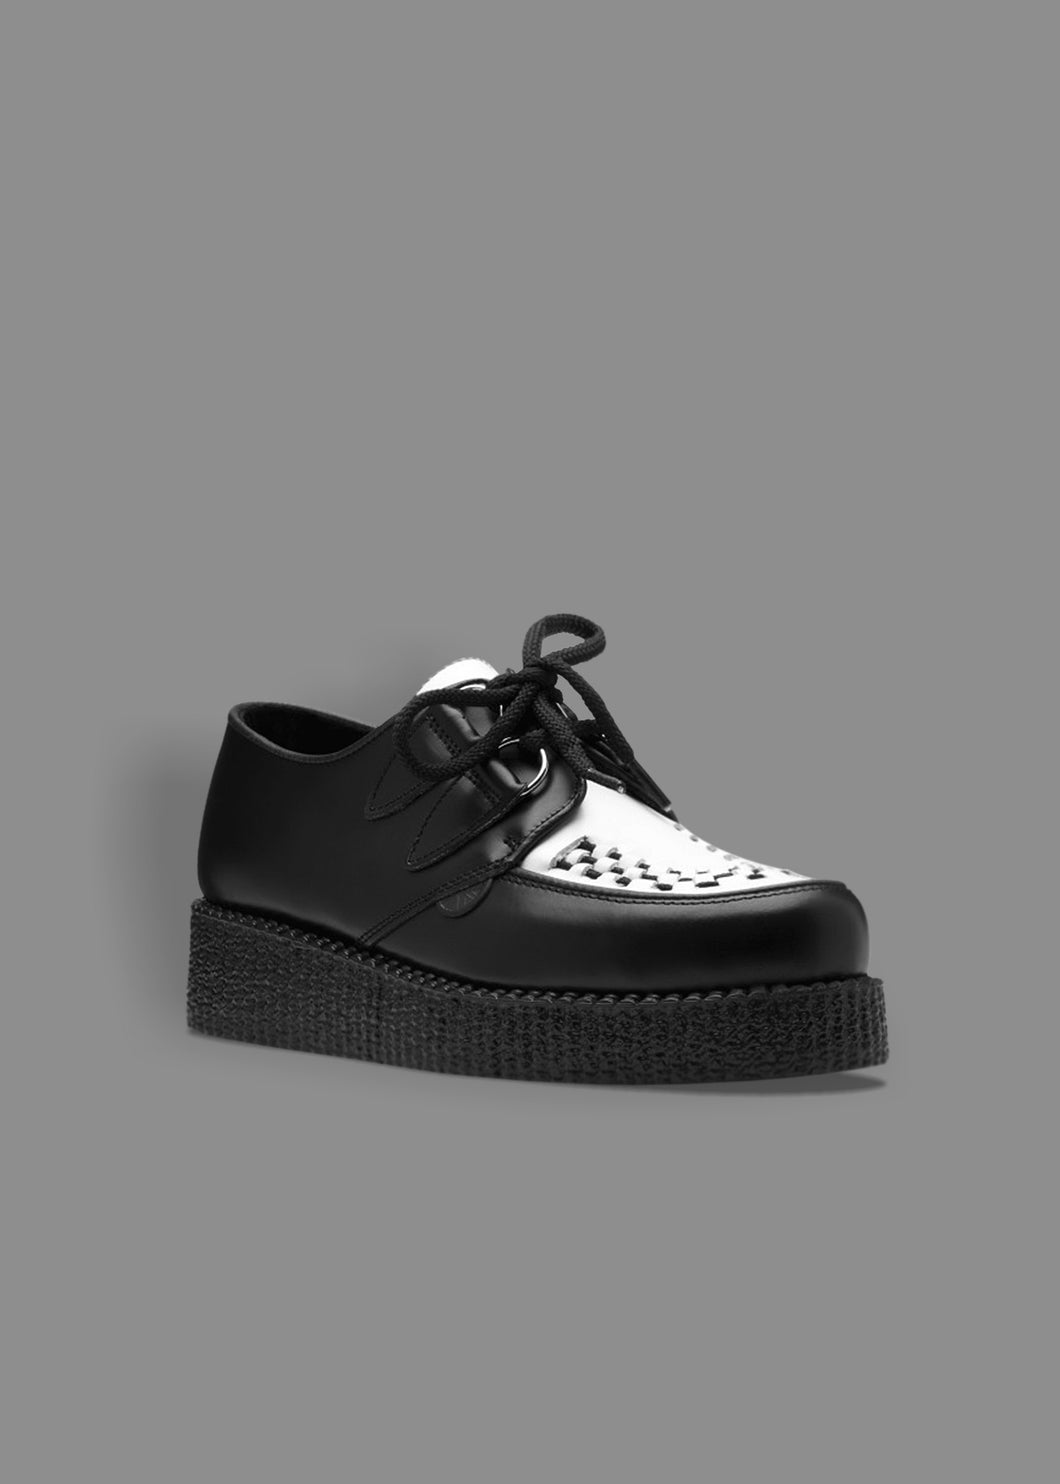 black and white creepers